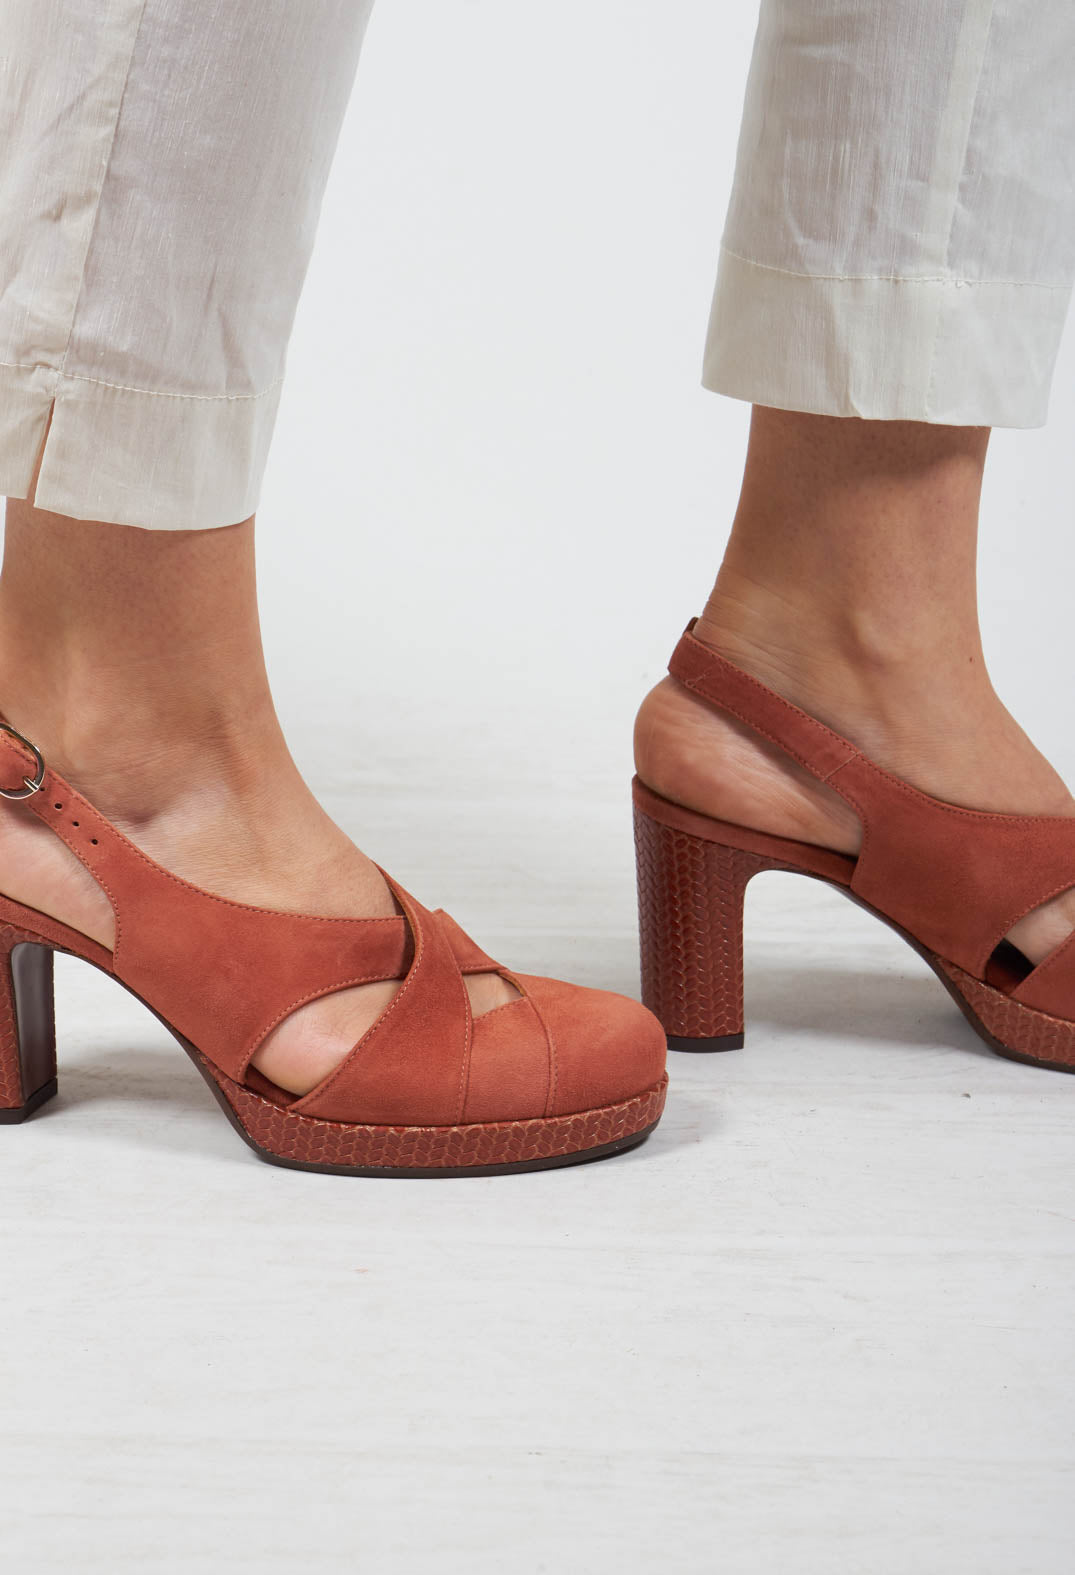 Backless Heel with Buckle Strap in Dark Rose